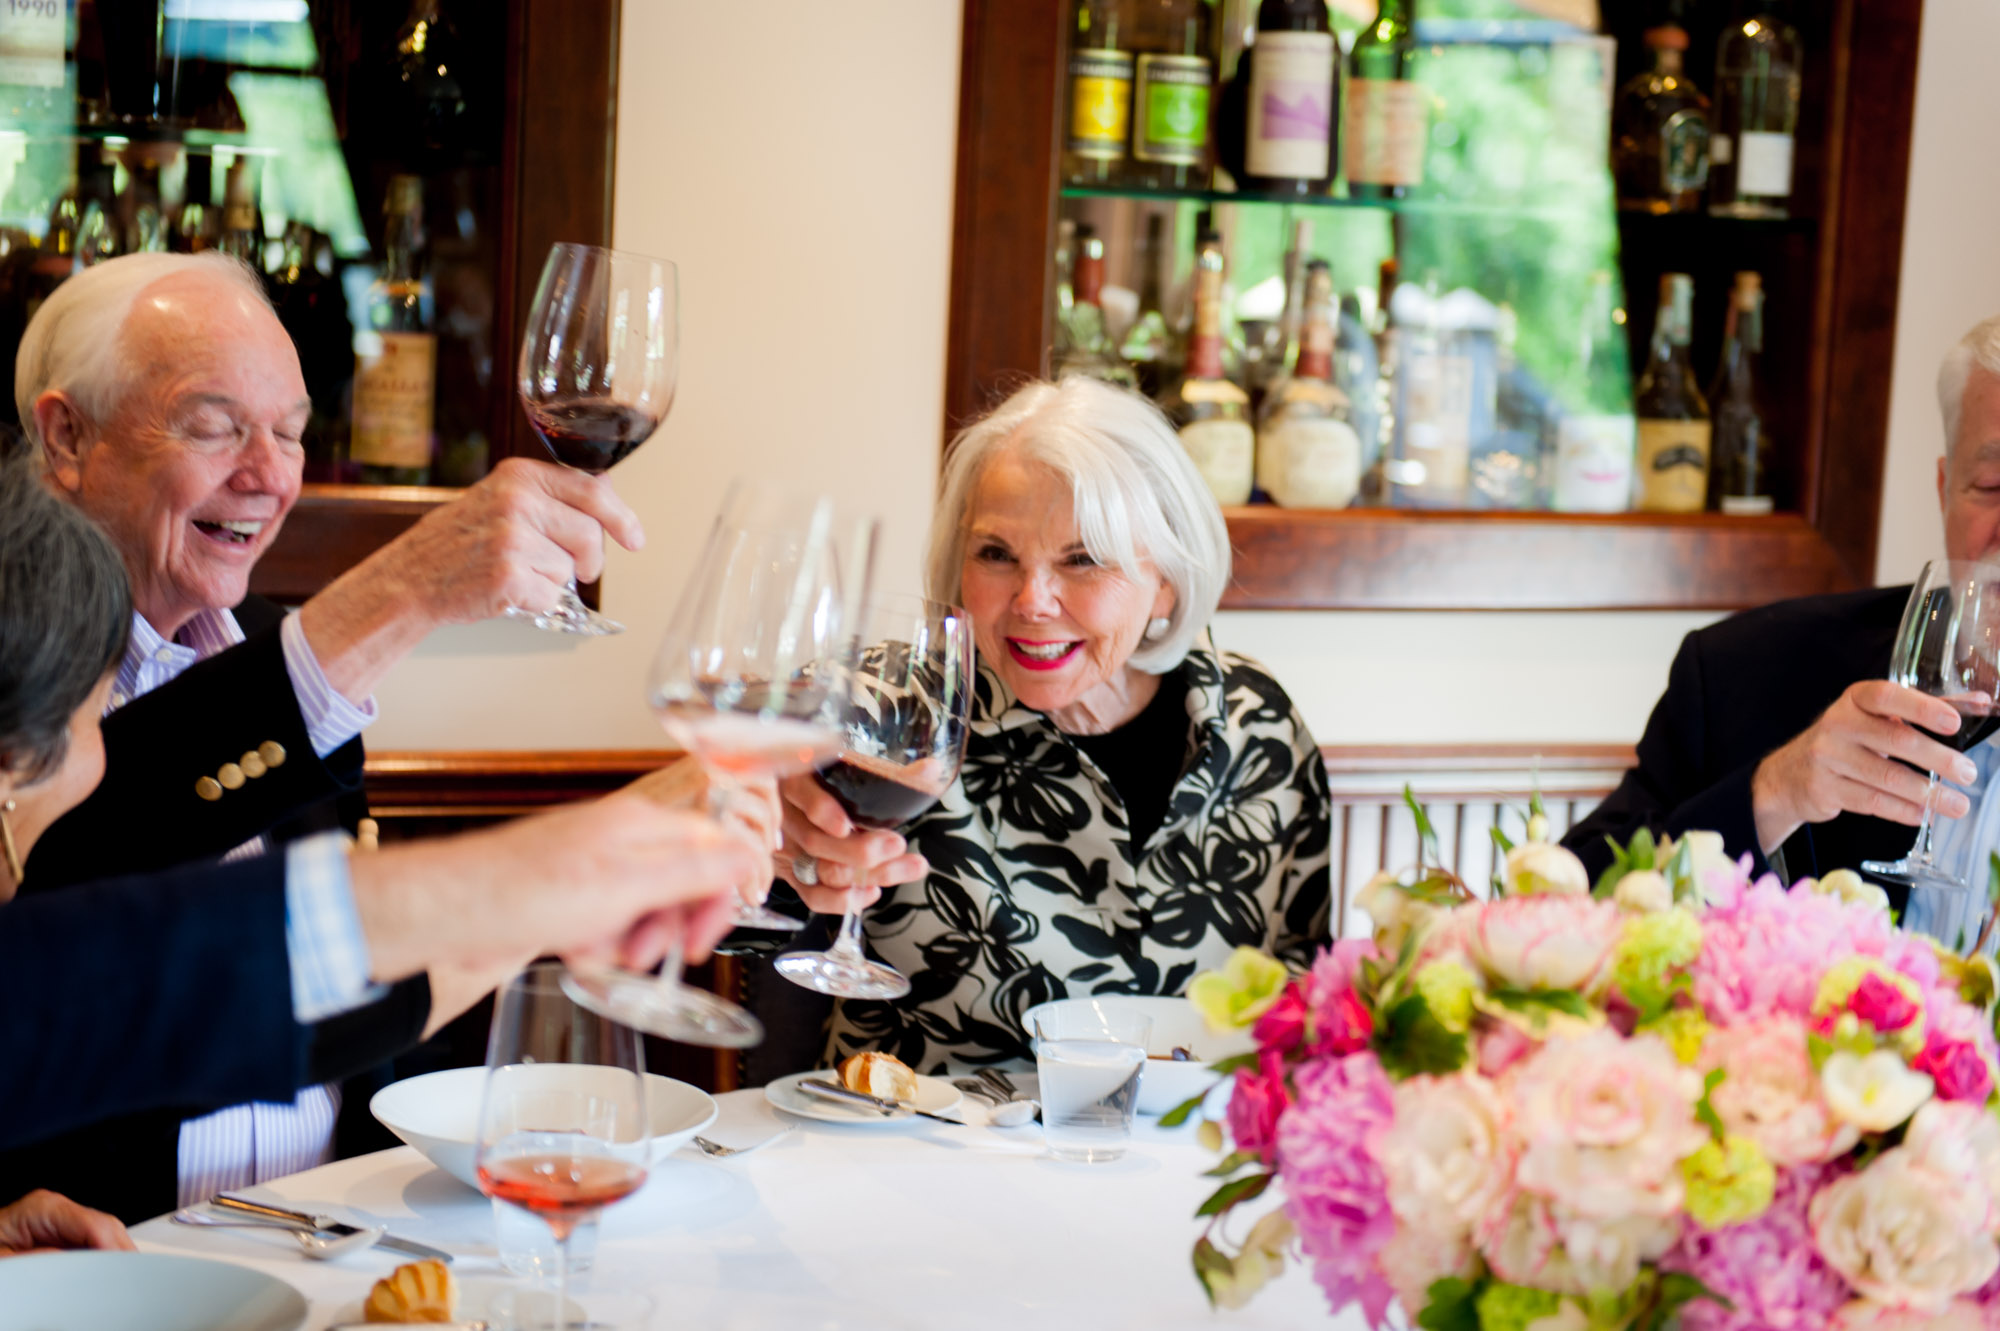  Private Party | The French Laundry, Yountville, California 